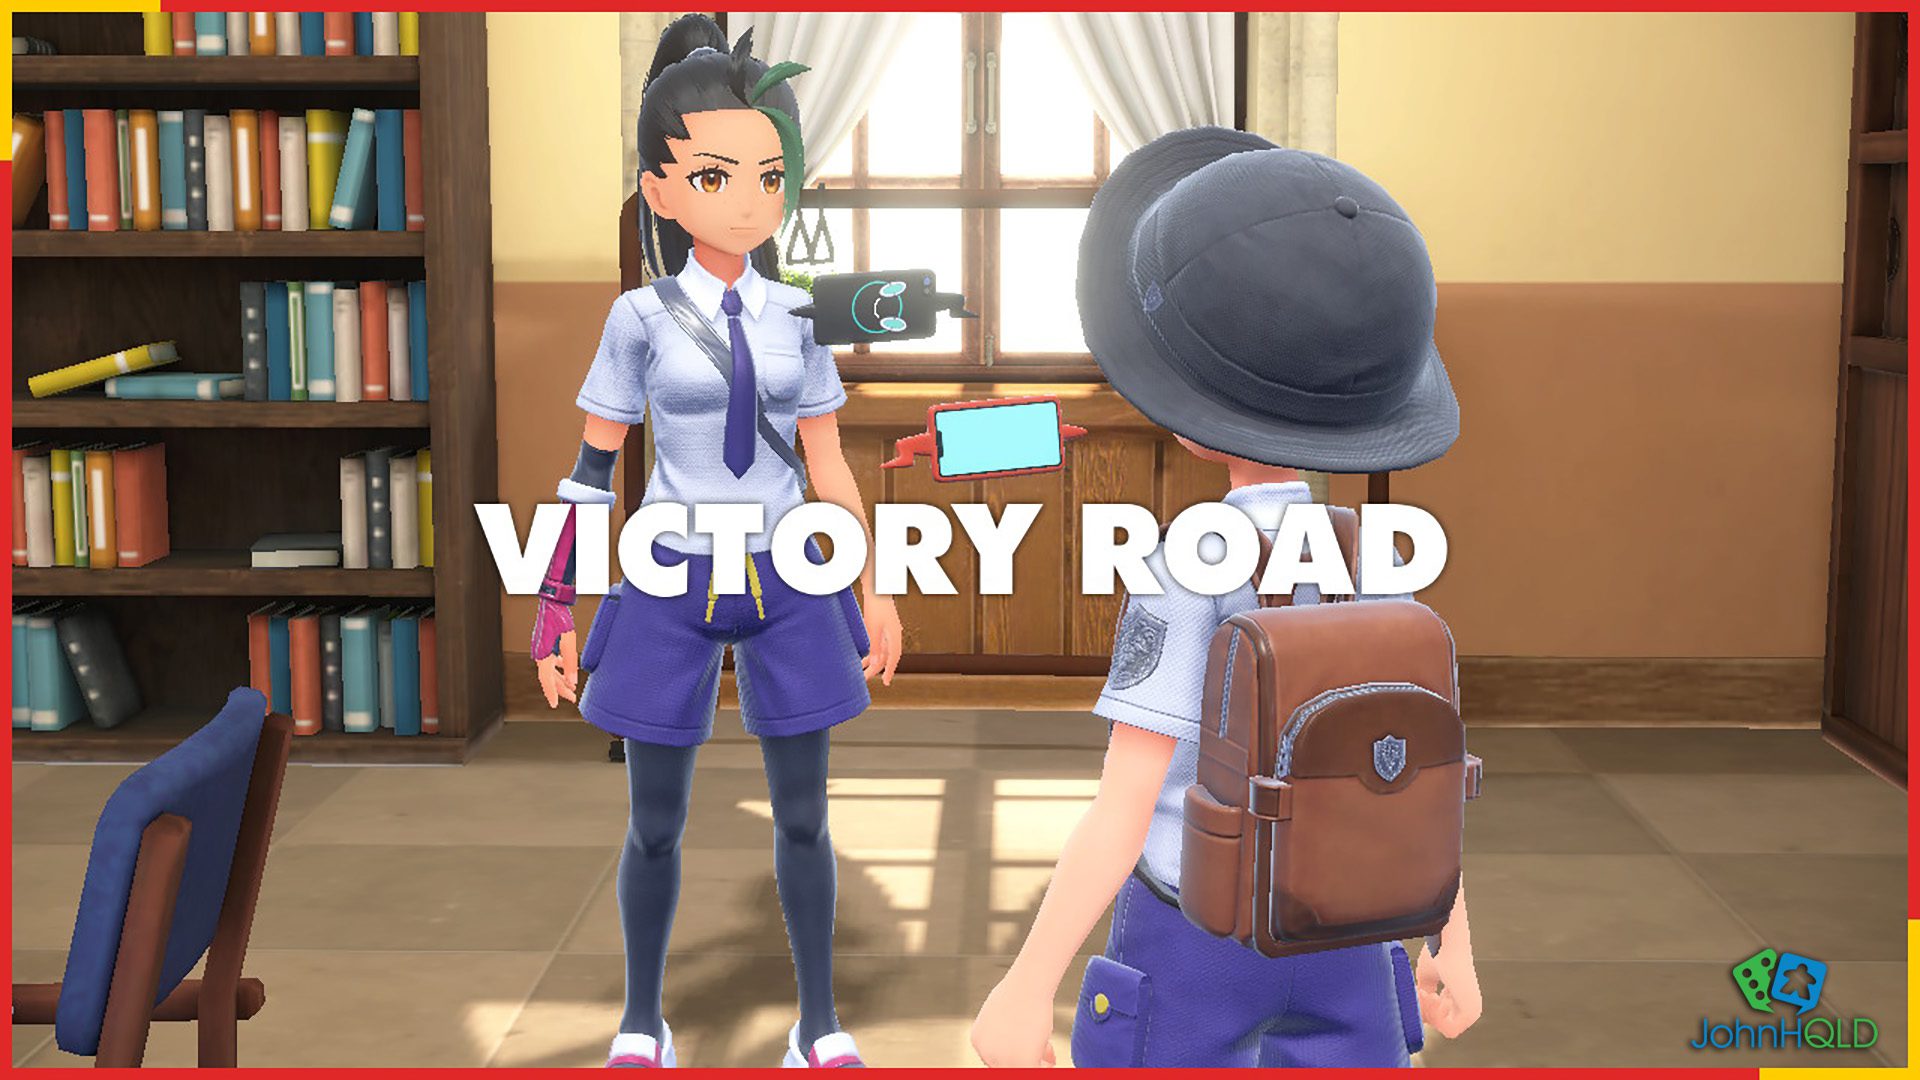 20221212 - Pokemon Violet - The classic Victory Road points are all spelt out once the game proper begins